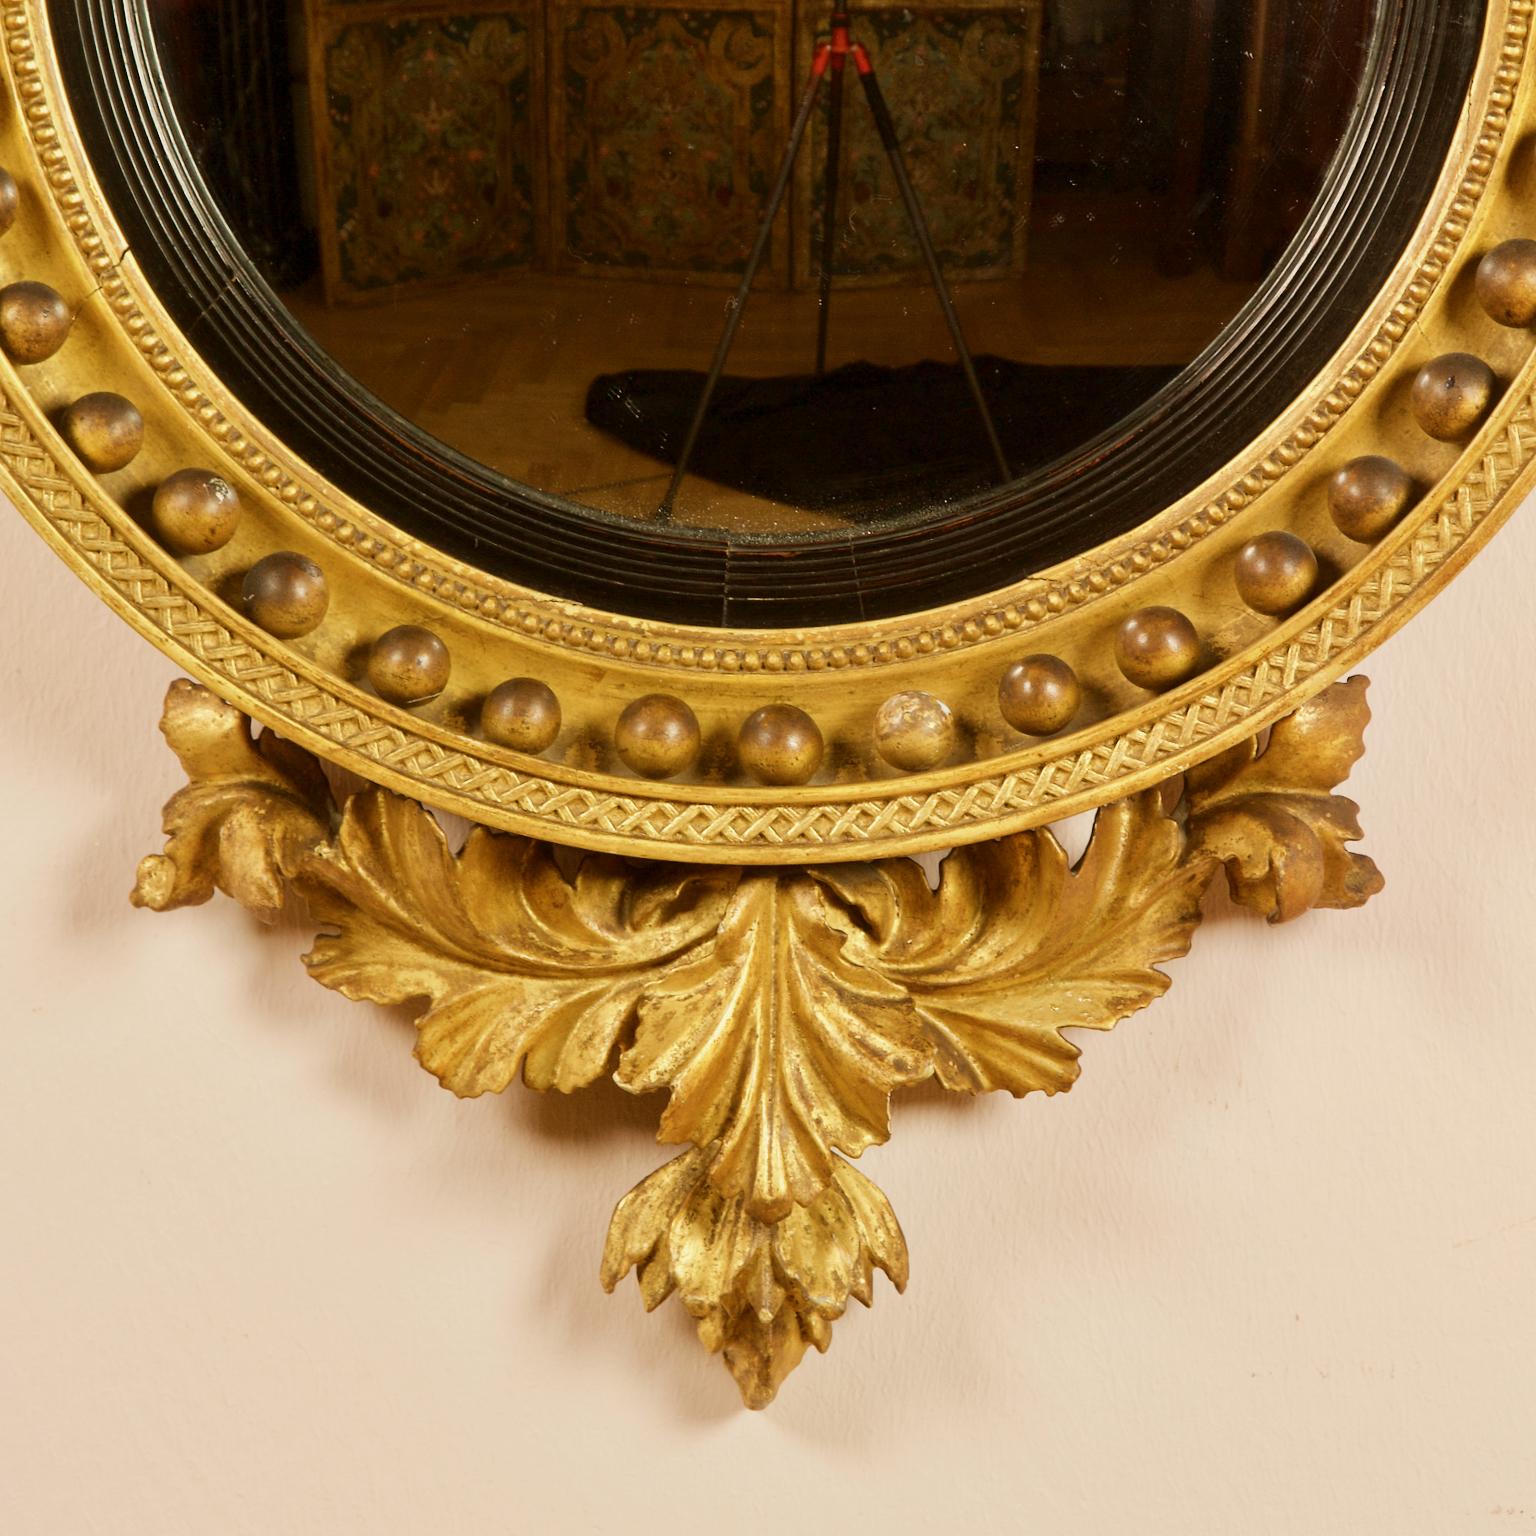 Early 19th Century English Regency Eagle Round Gilt and Ebonized Wood Convex Wall Mirror

A large early 19th century English Regency Neoclassical convex mirror in a round gilt and partially ebonized wood frame. The frame features gilt balls, a pearl